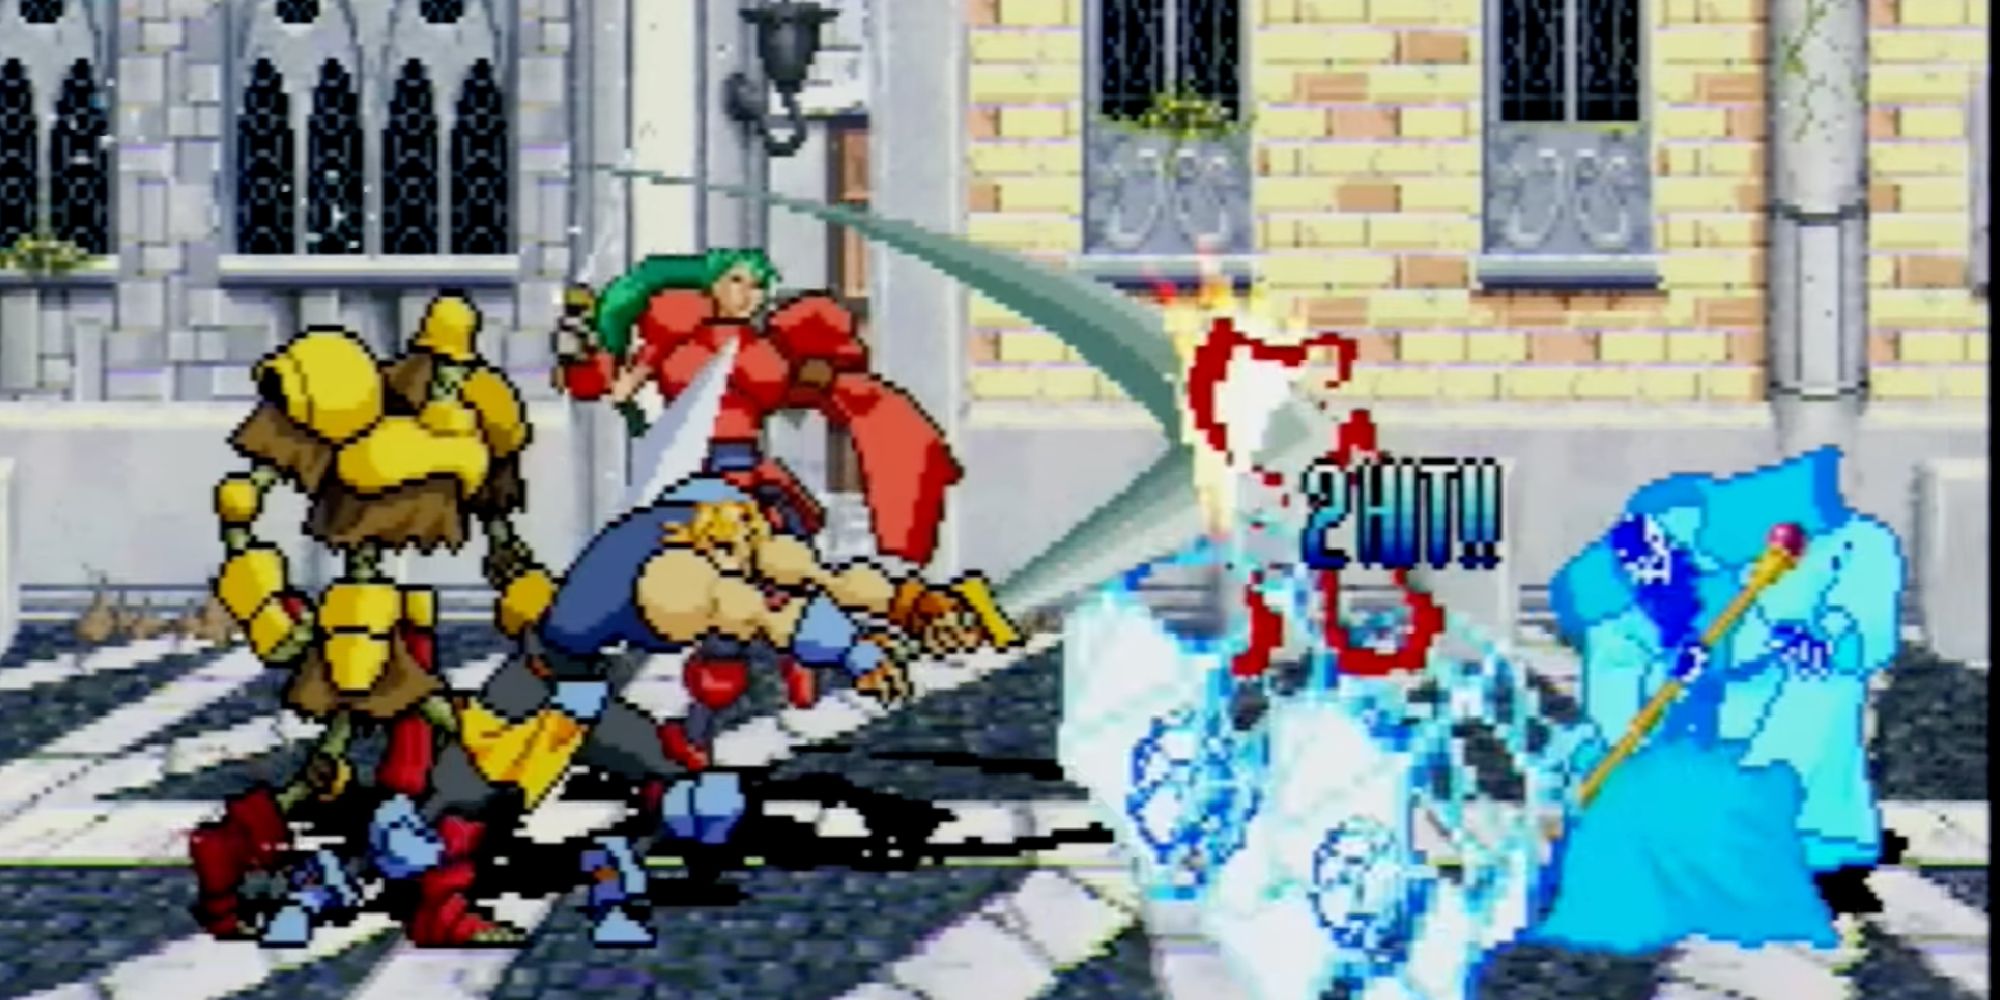 A screenshot from Guardian Heroes, showing a character swinging their sword against a mage enemy